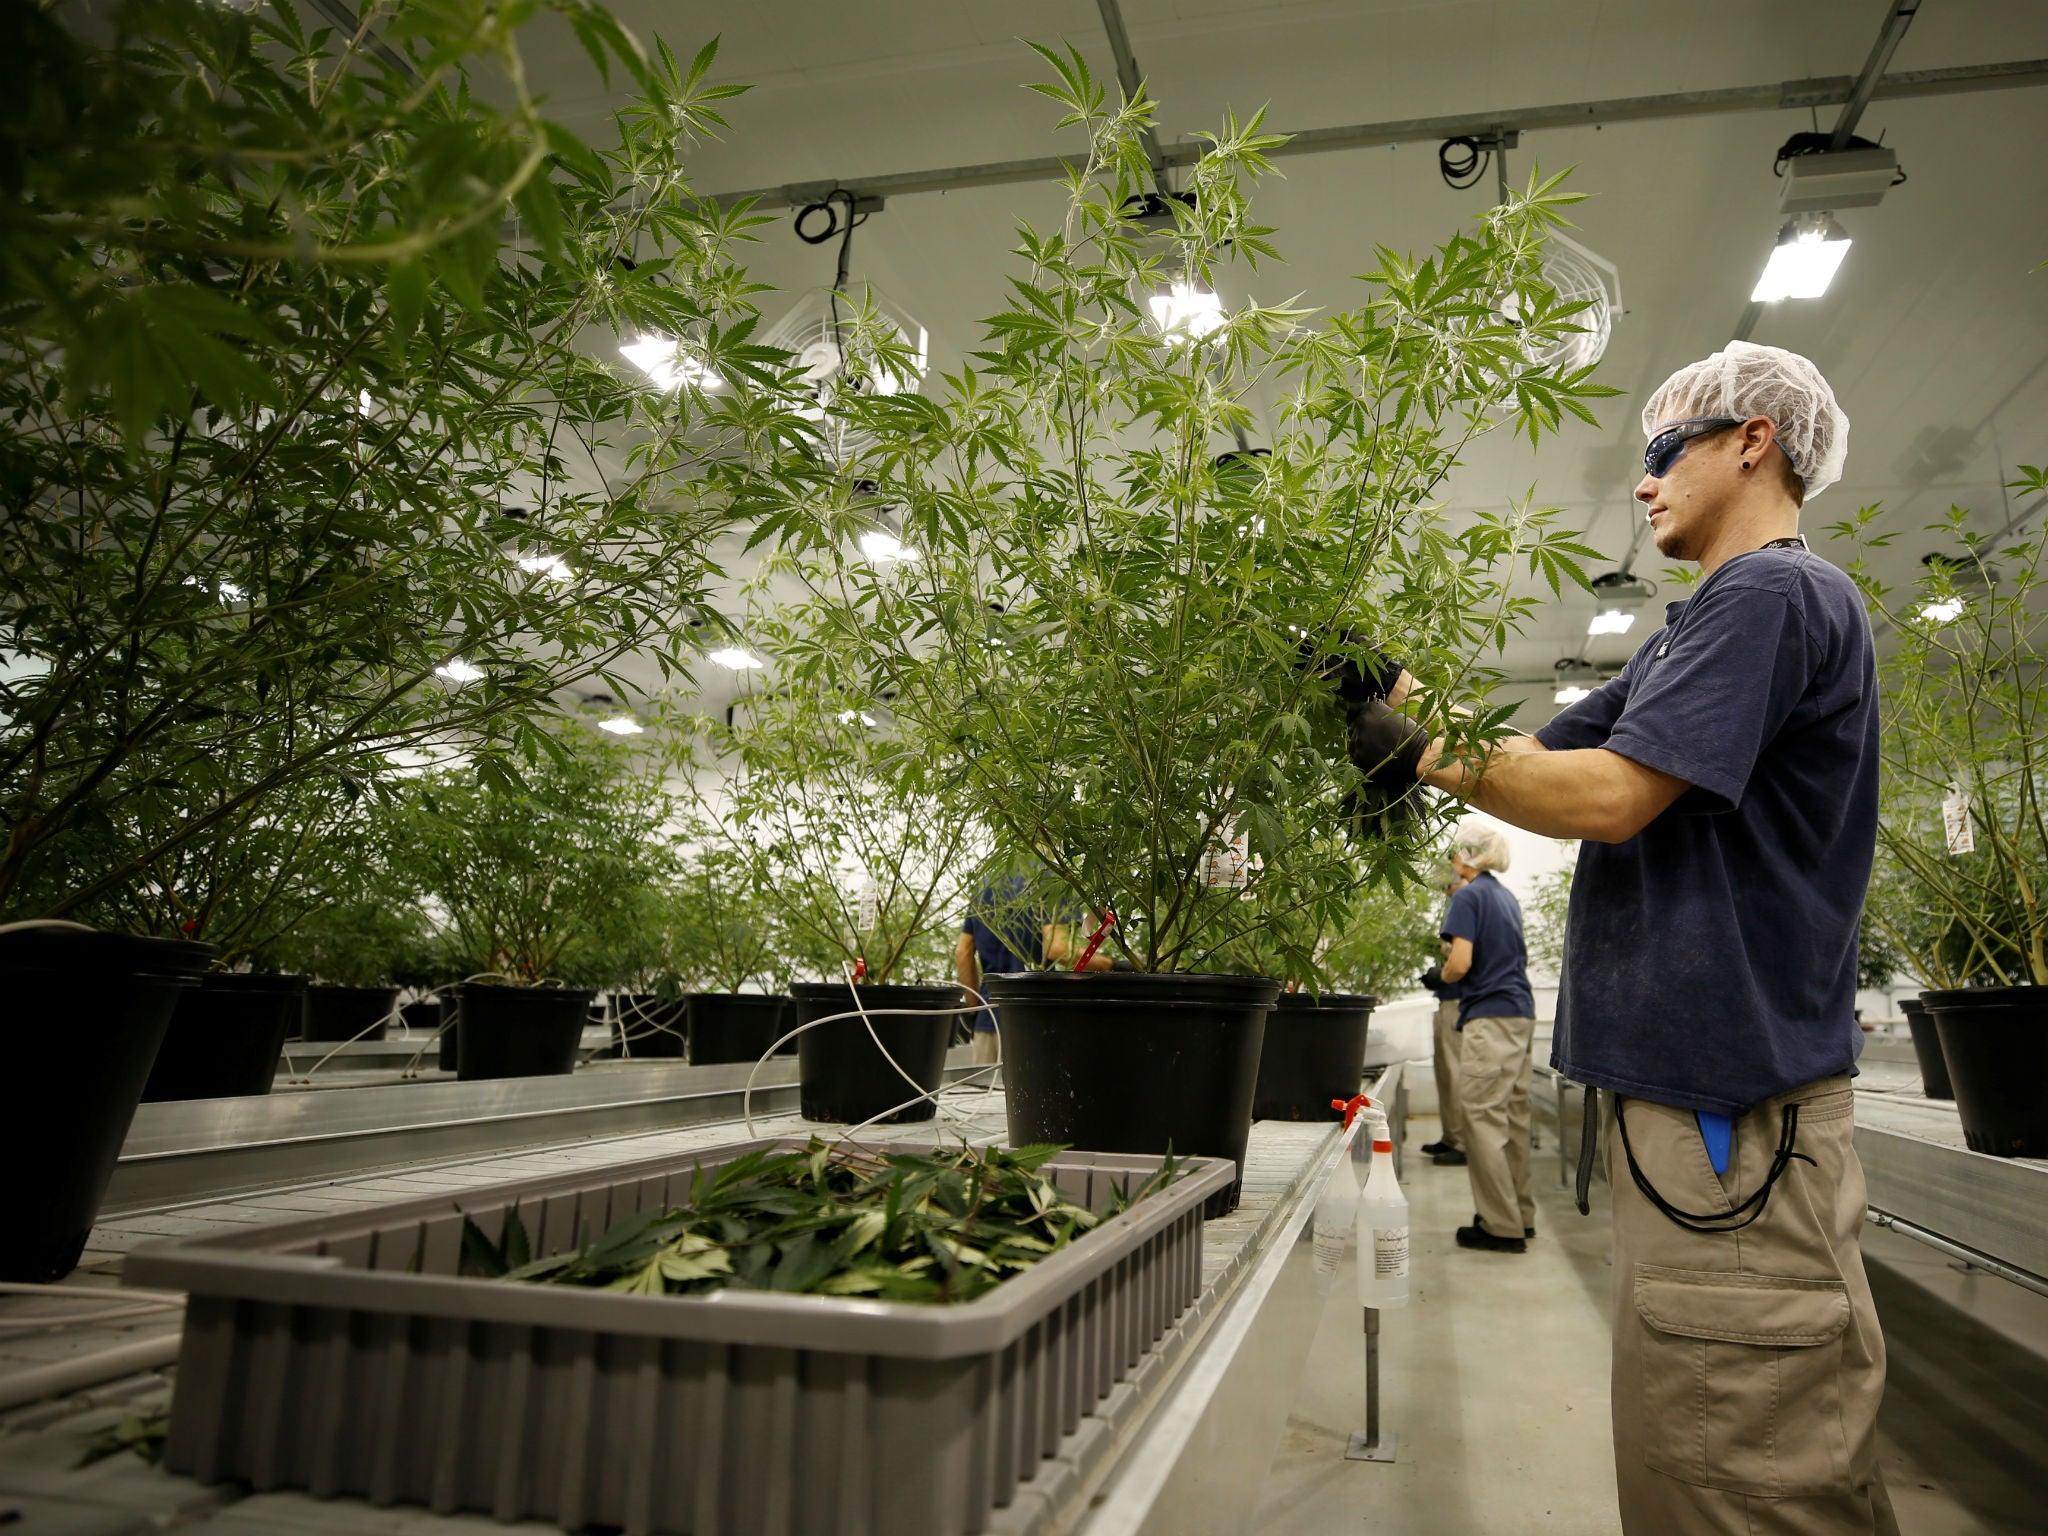 A worker collects cuttings from a marijuana plant at the Canopy Growth Corporation facility in Smiths Falls, Canada